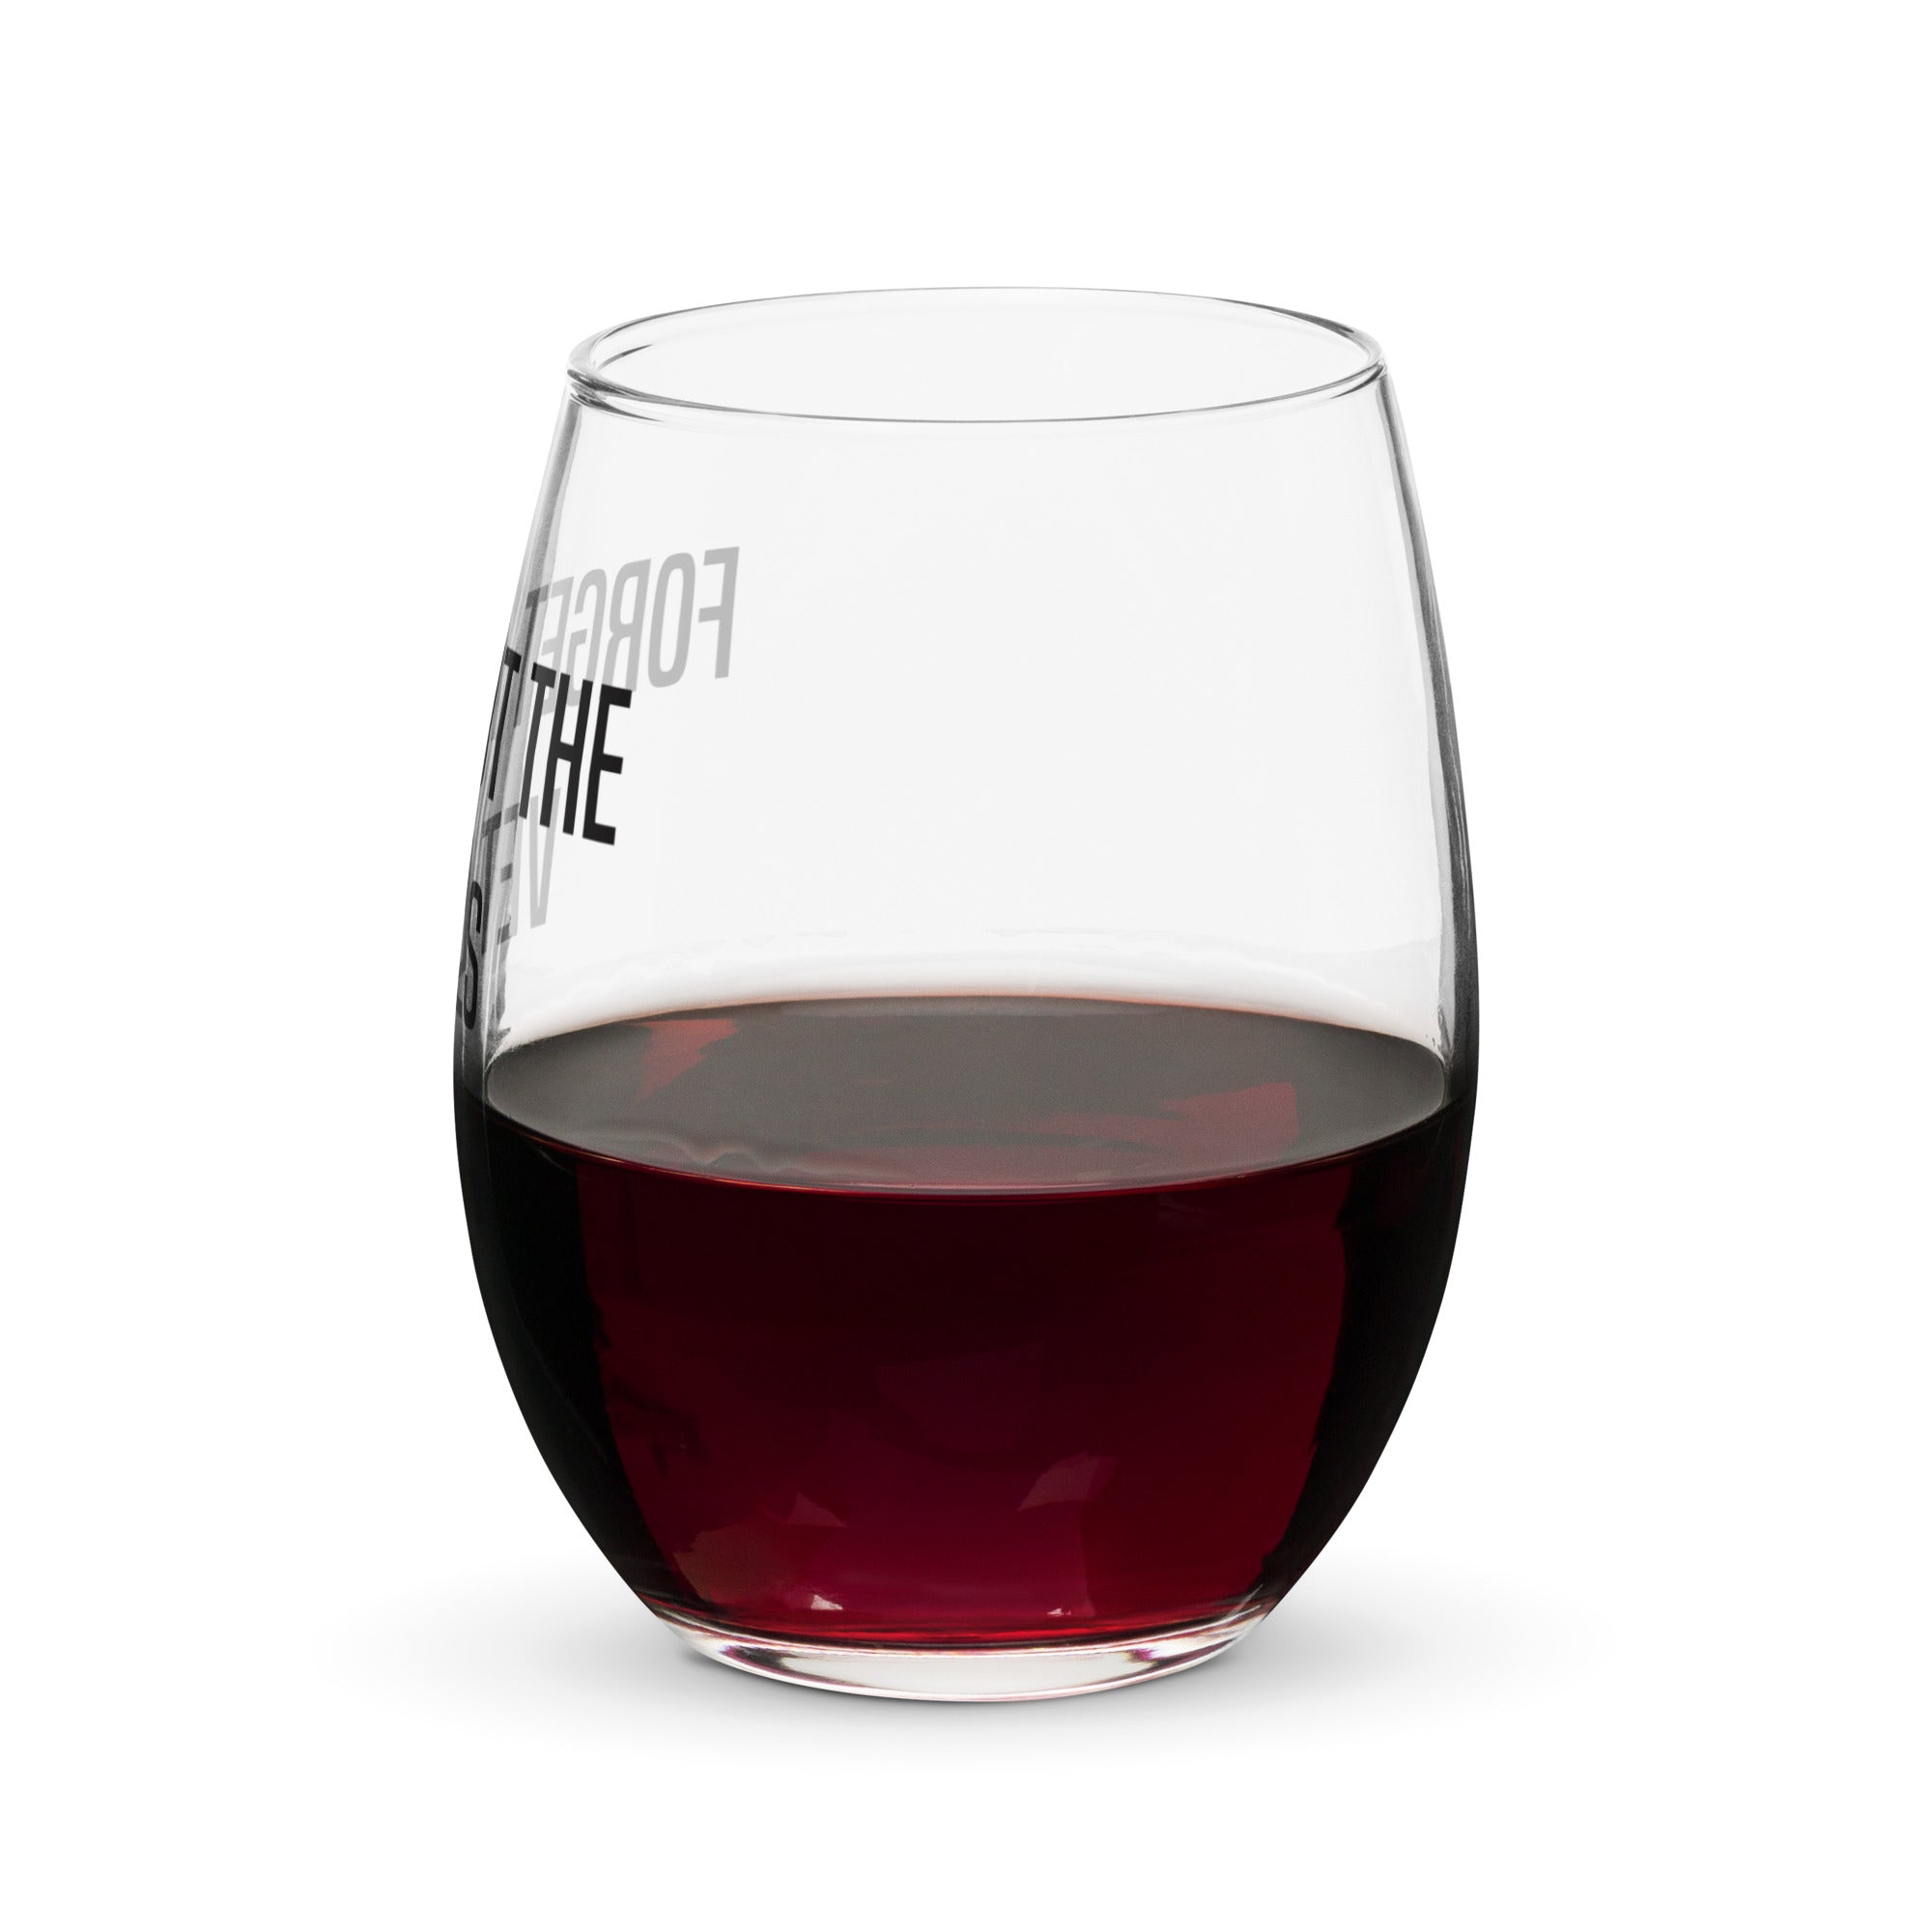 Cavaliere Couture 'Vet Bills' Wine Glass - Equiluxe Tack